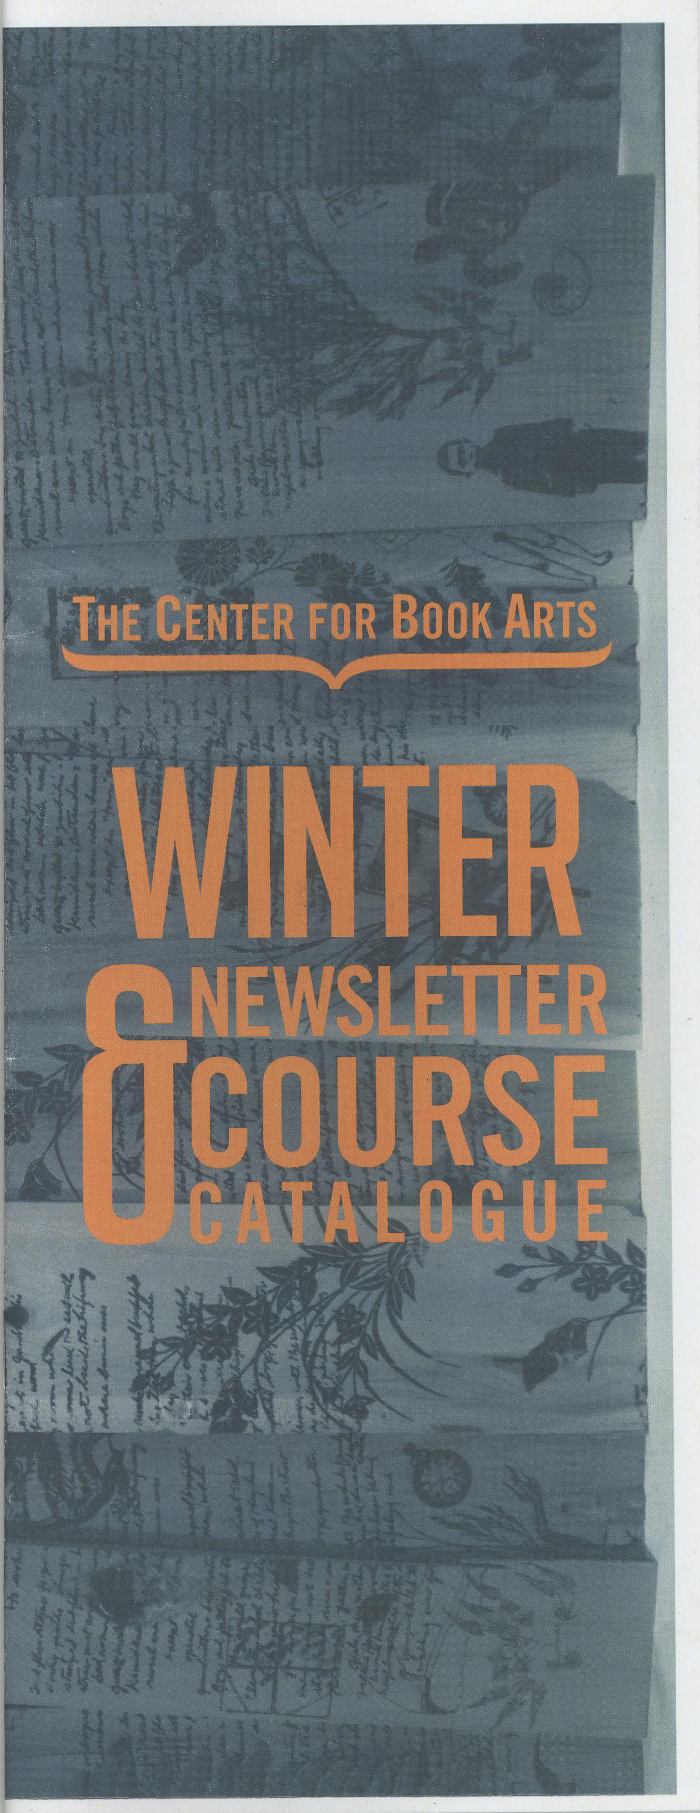 Winter 2013 Center for Book Arts' newsletter and course catalogue
